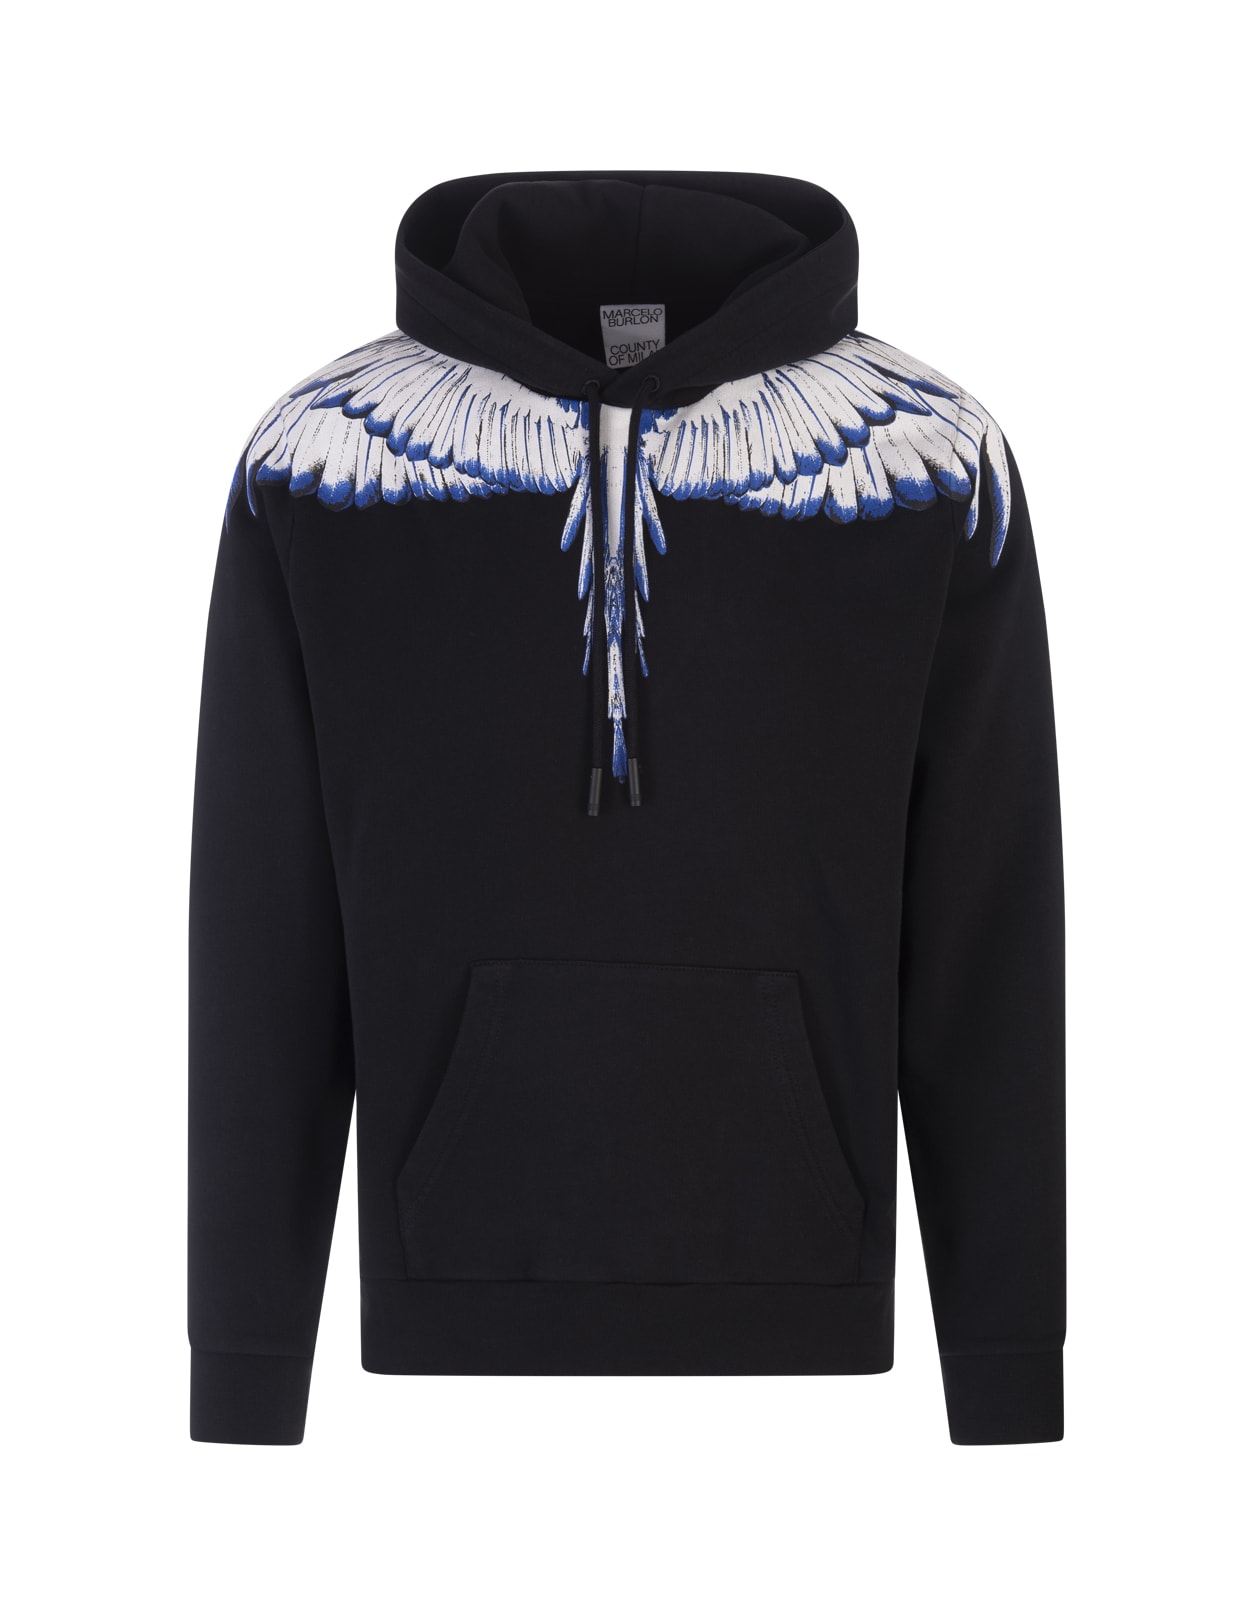 Marcelo Burlon Black Hoodie With White And Blue Wings Print